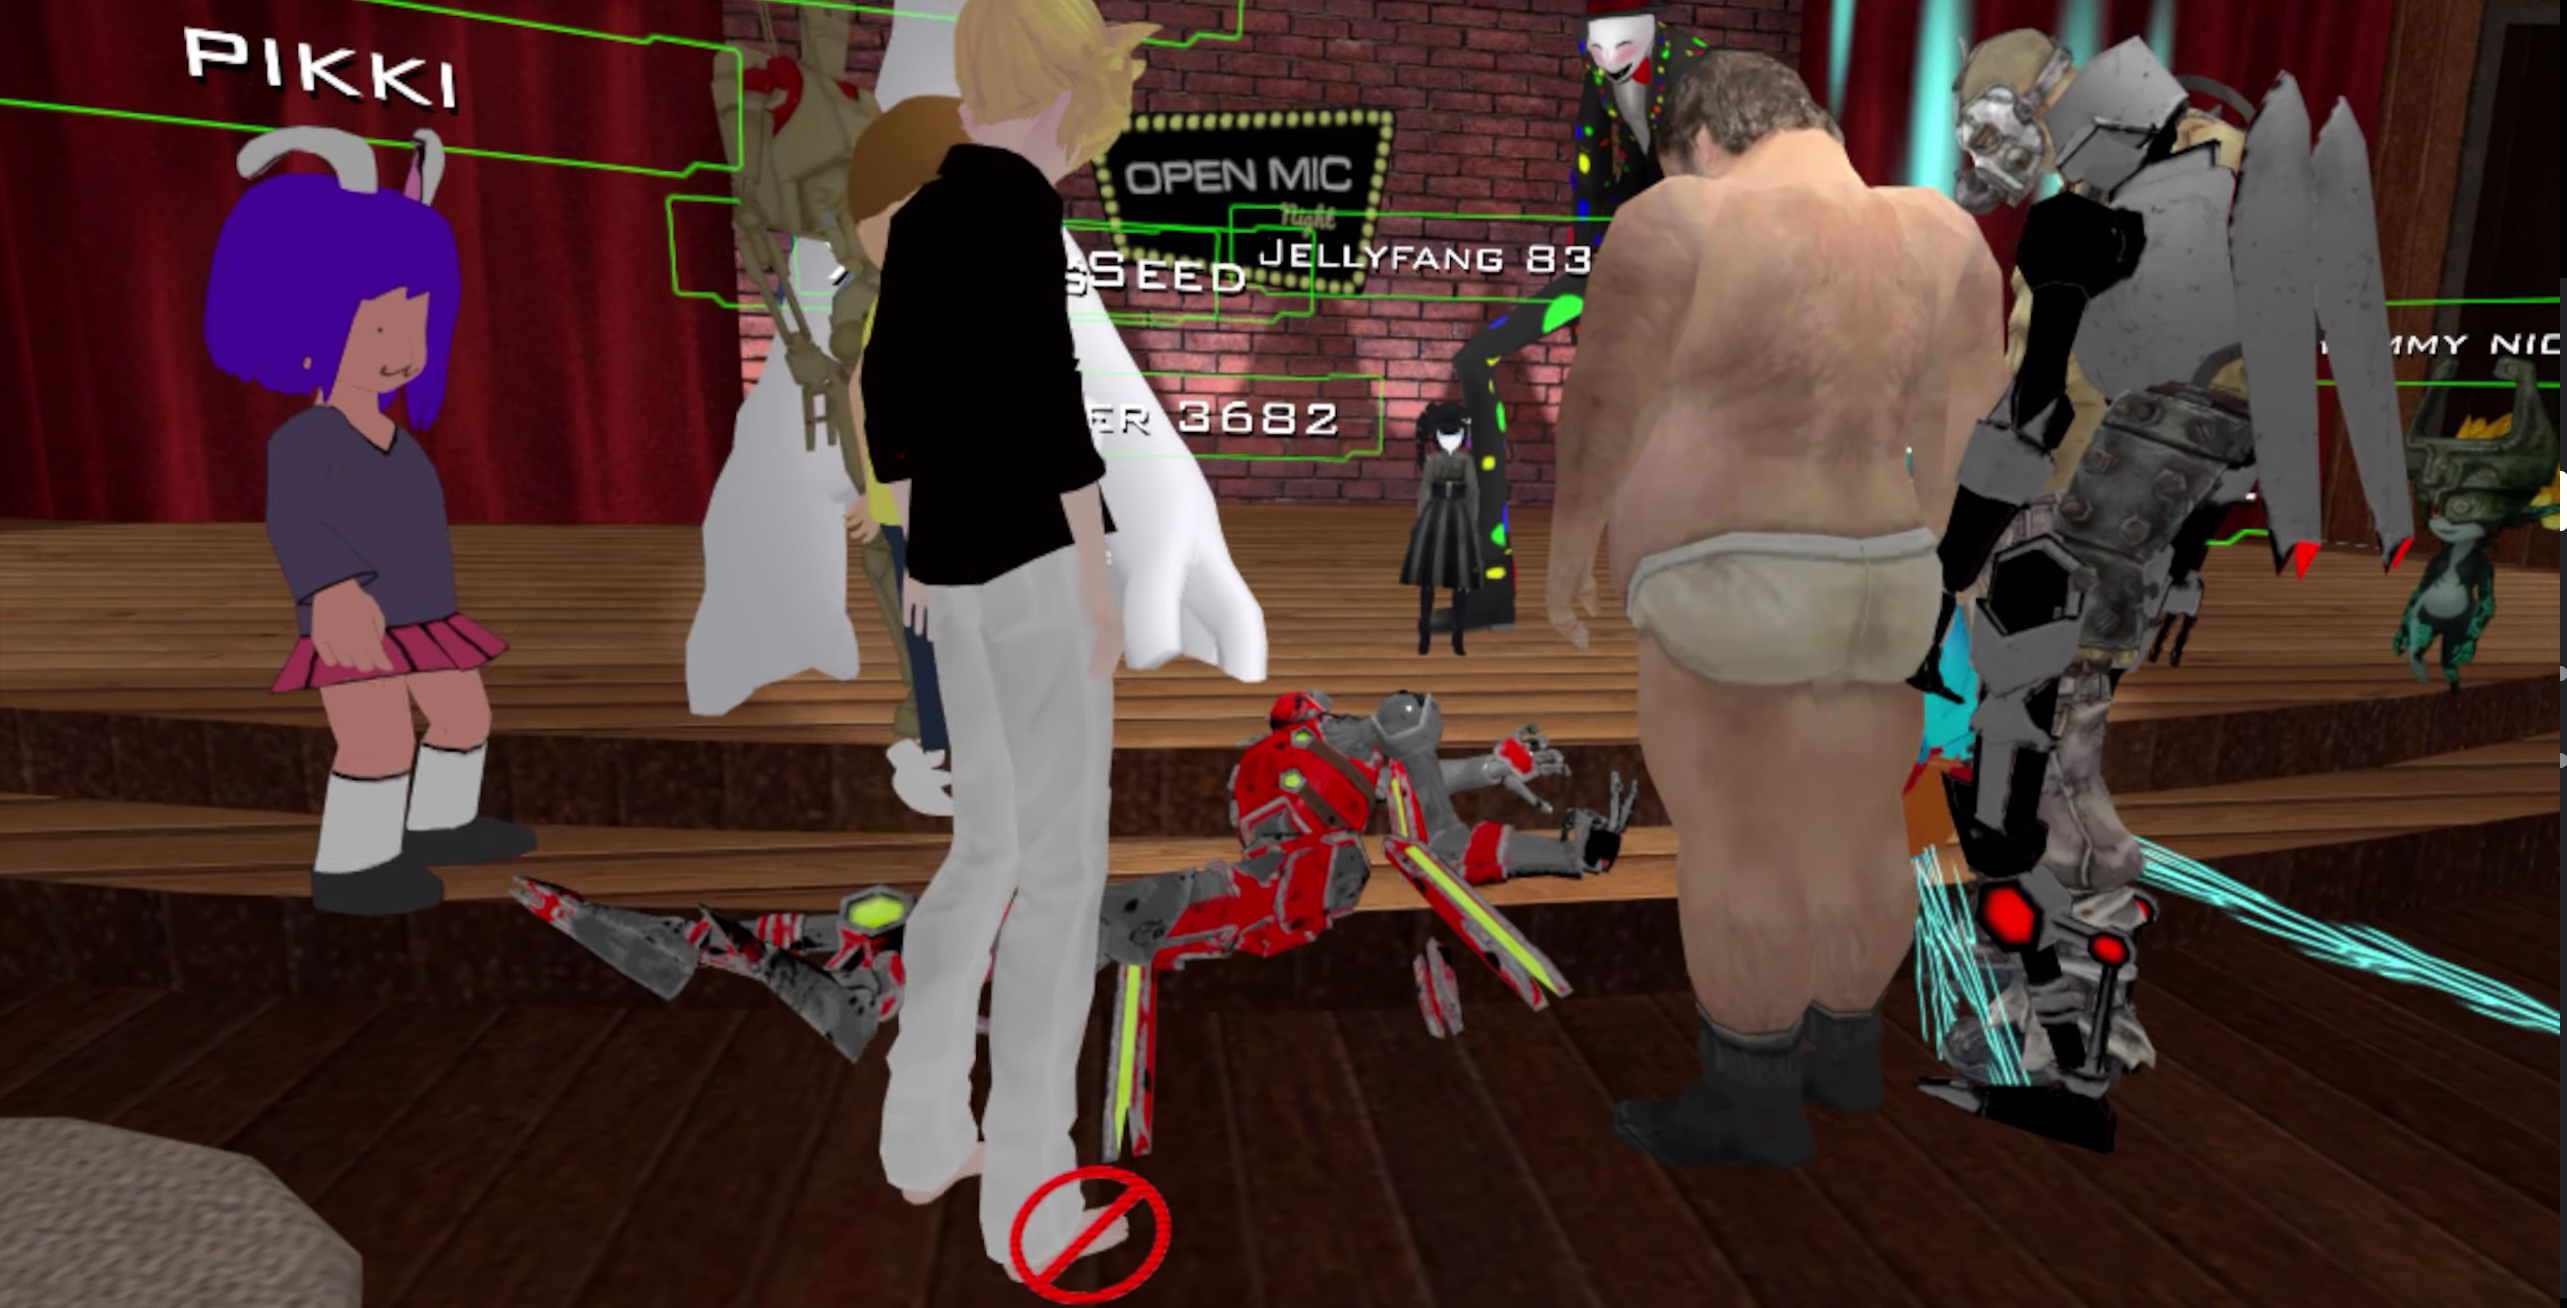 Vrchat Players Know The Way To Help Seizure Victim Wearing Full